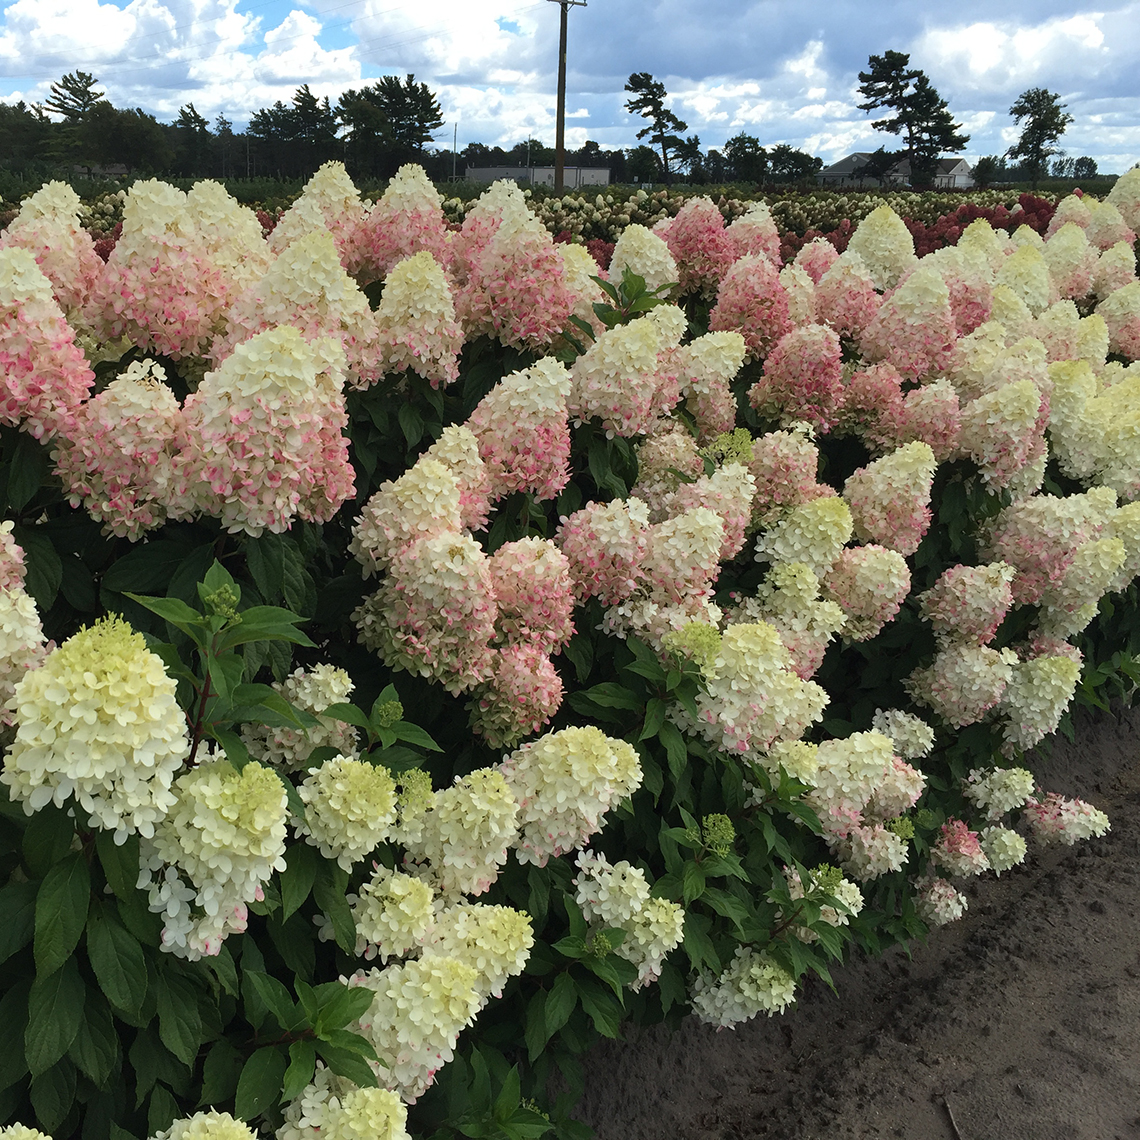 A row of Pillow Talk panicle hydrangeas blooming showing the large white flowers taking on a light pink color